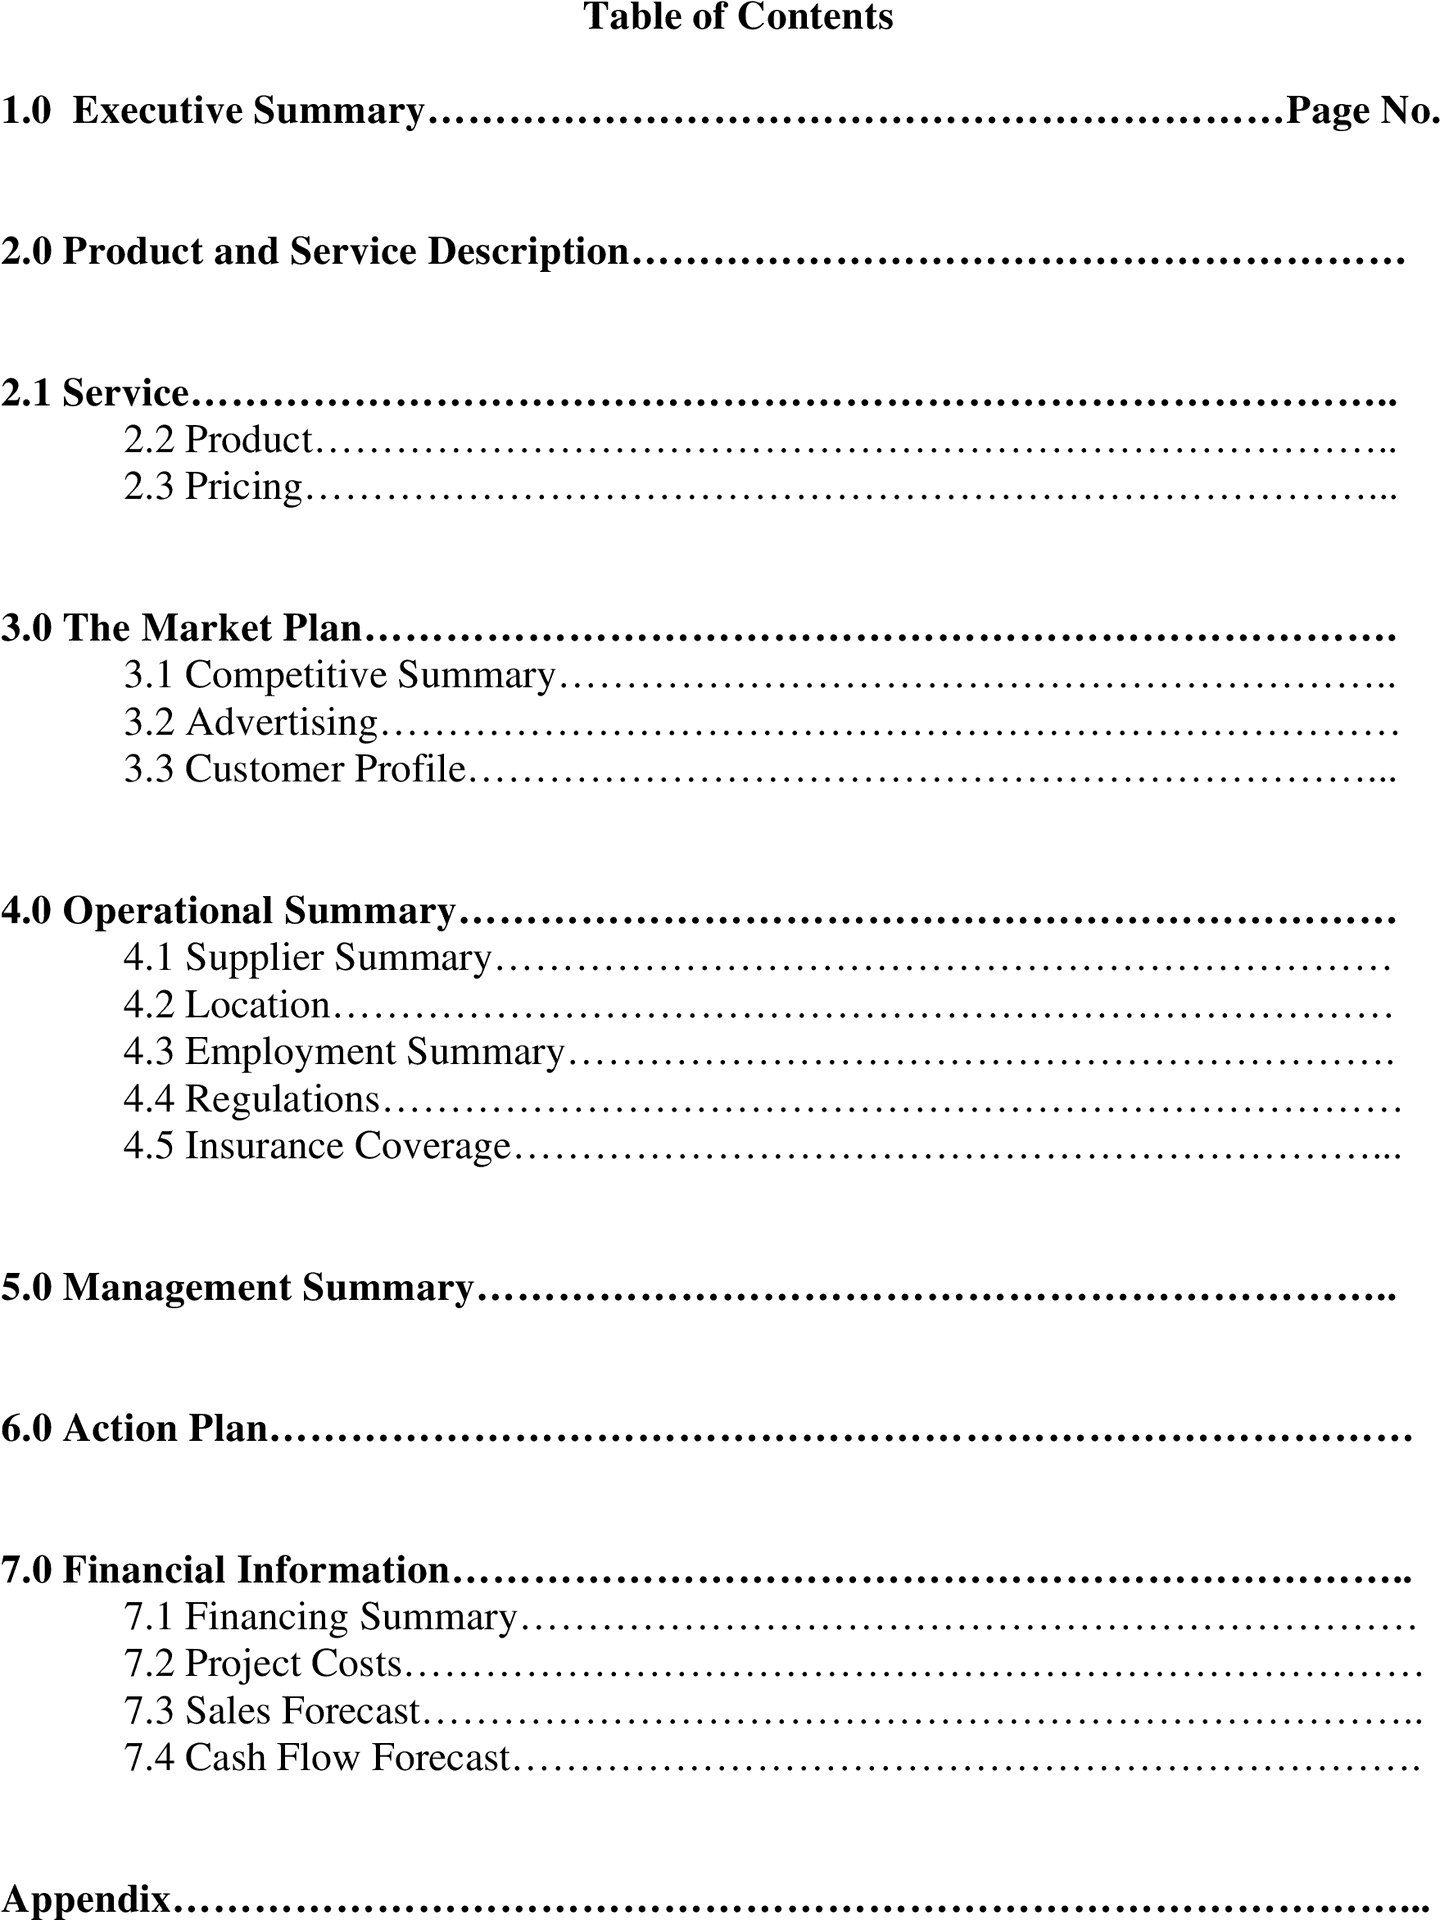 Business Plan Tableof Contents PNG image